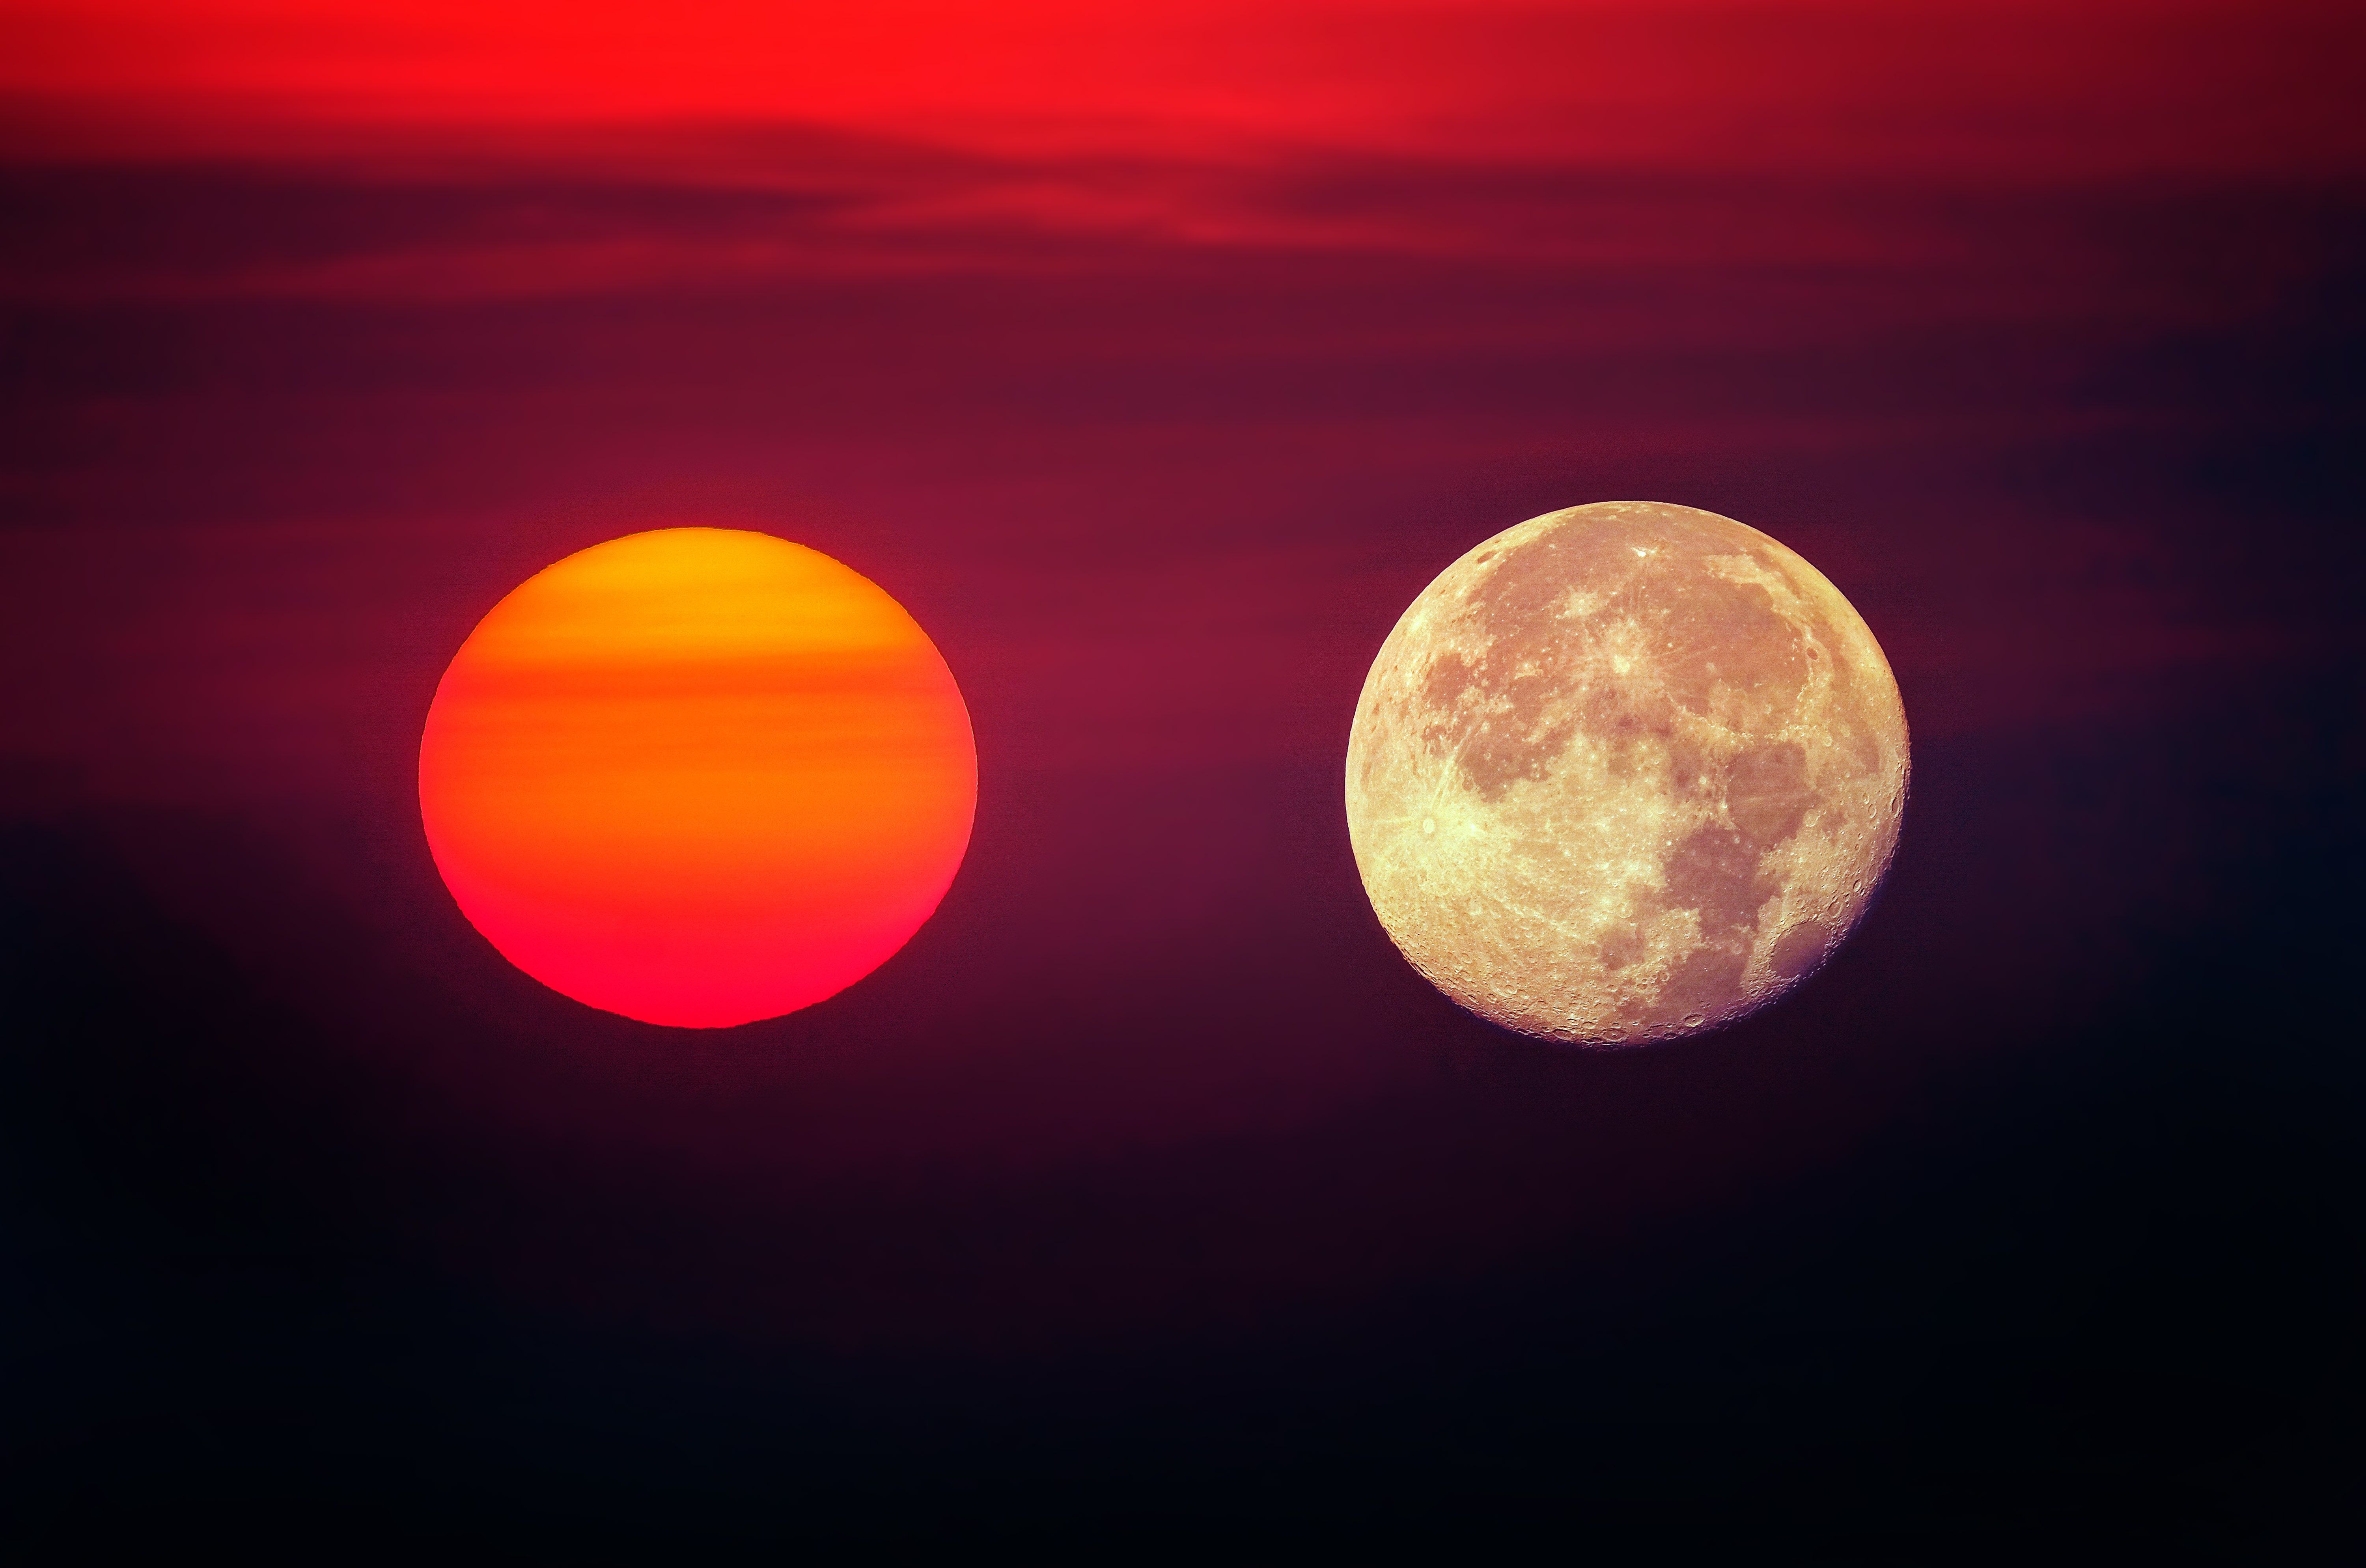 sun and moon royalty free